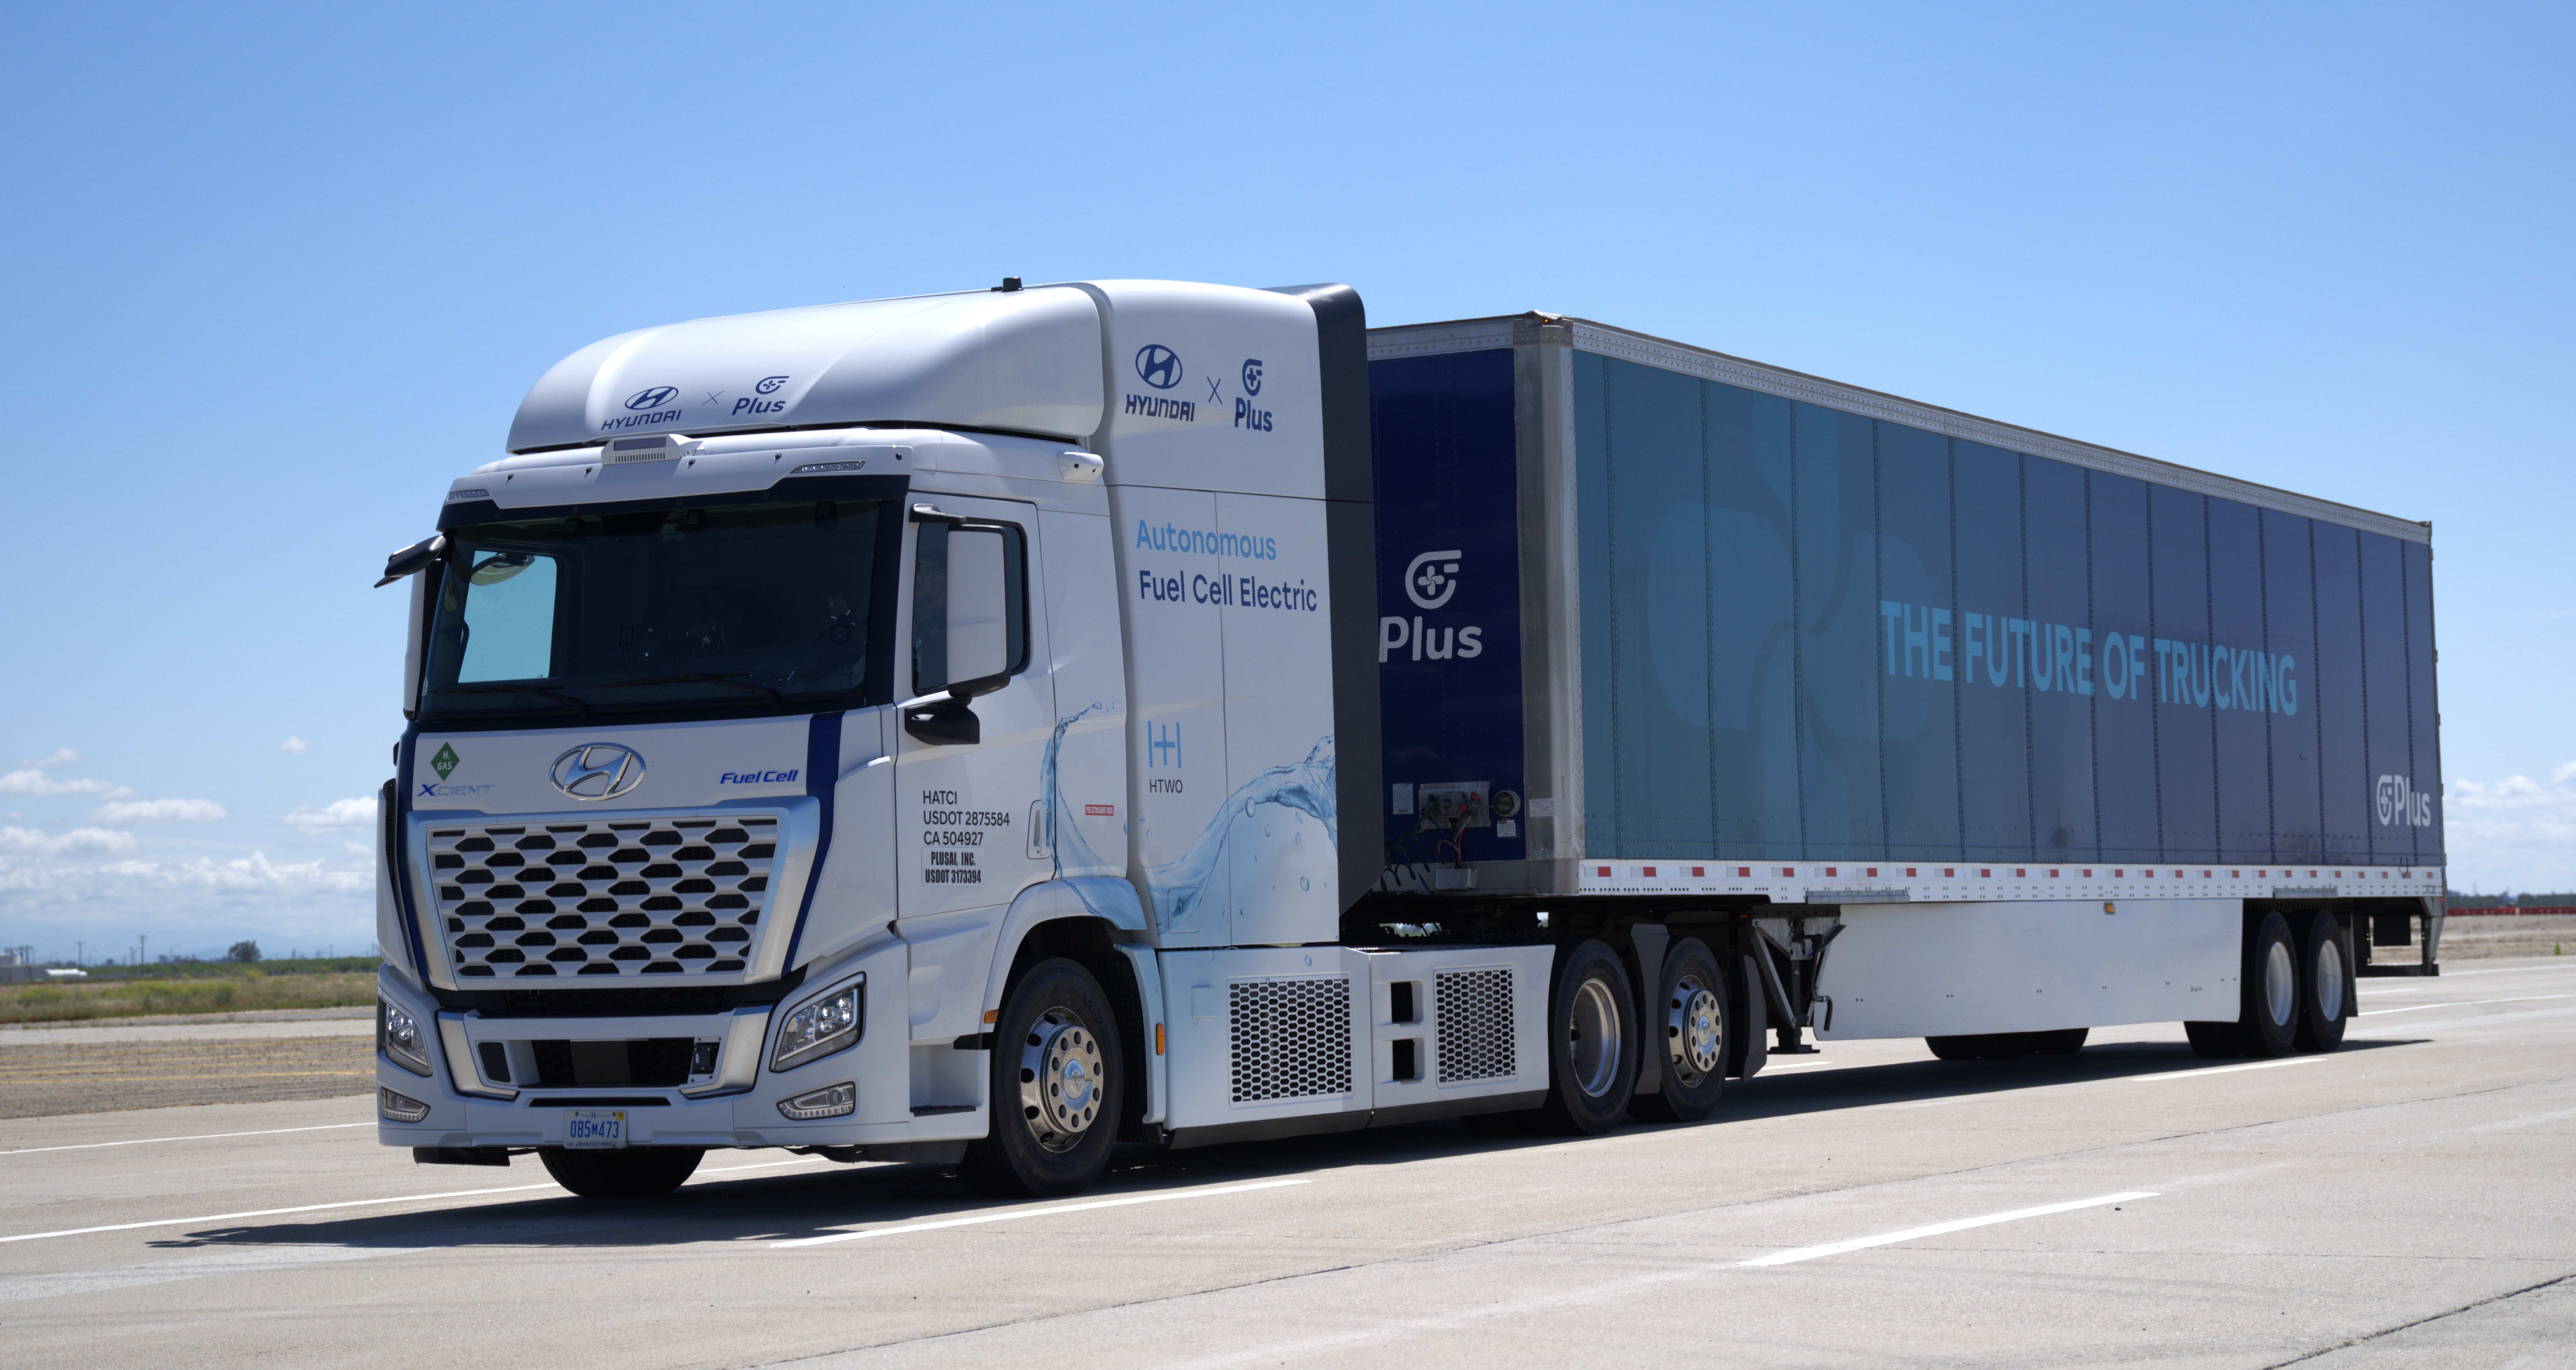 Hyundai Motor and Plus Announce Collaboration to Demonstrate First Level 4 Autonomous Fuel Cell Electric Truck in the US